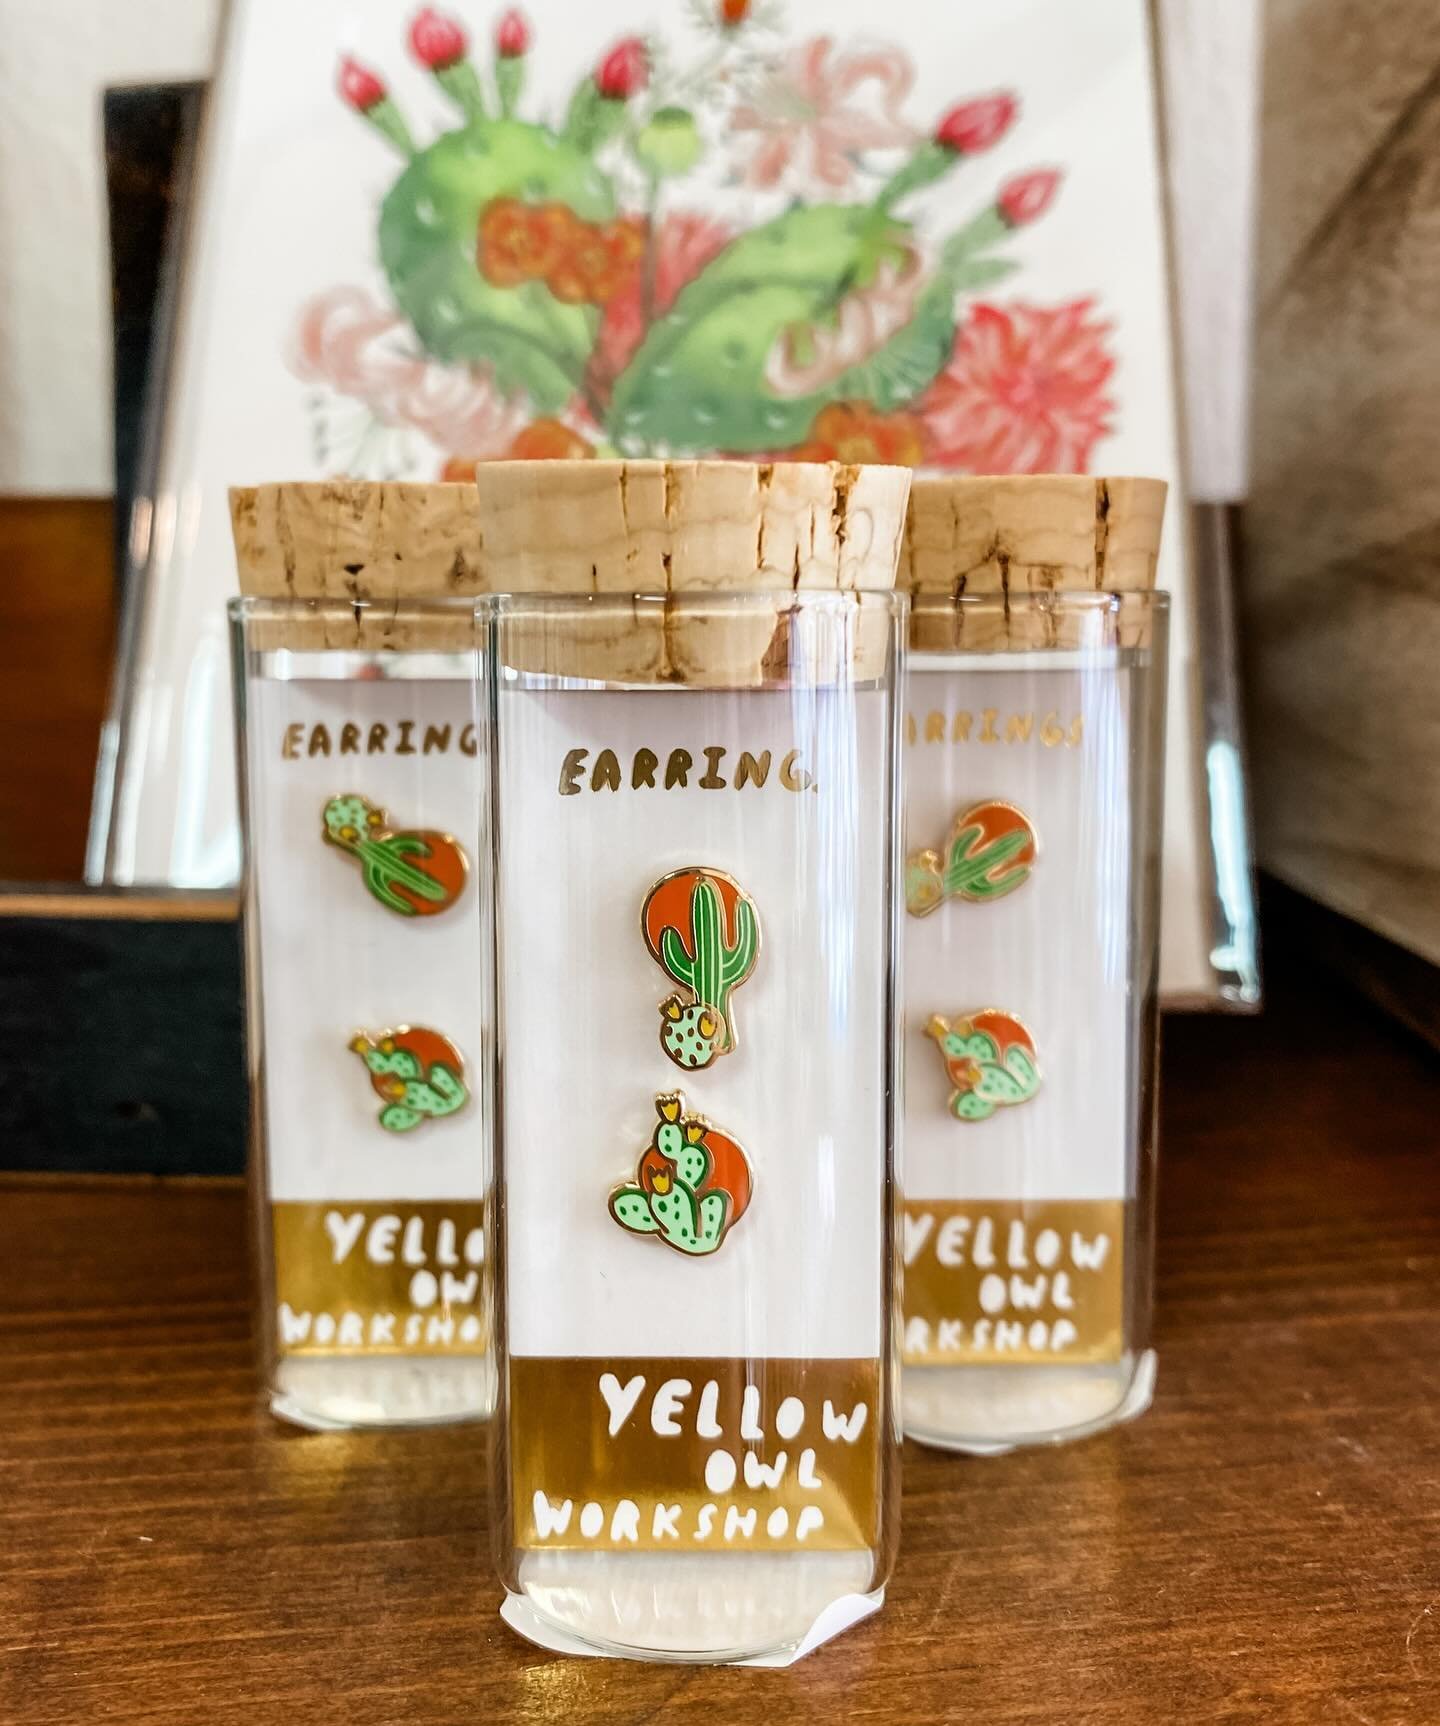 The sun is shining and it&rsquo;s a beautiful day to be downtown! 🙌 We are open 10-6 today, 12-4 tomorrow, and closed on Memorial Day. Pop in and see all of the new items we&rsquo;ve put out this week, including these adorable cactus earrings! 🌵

#